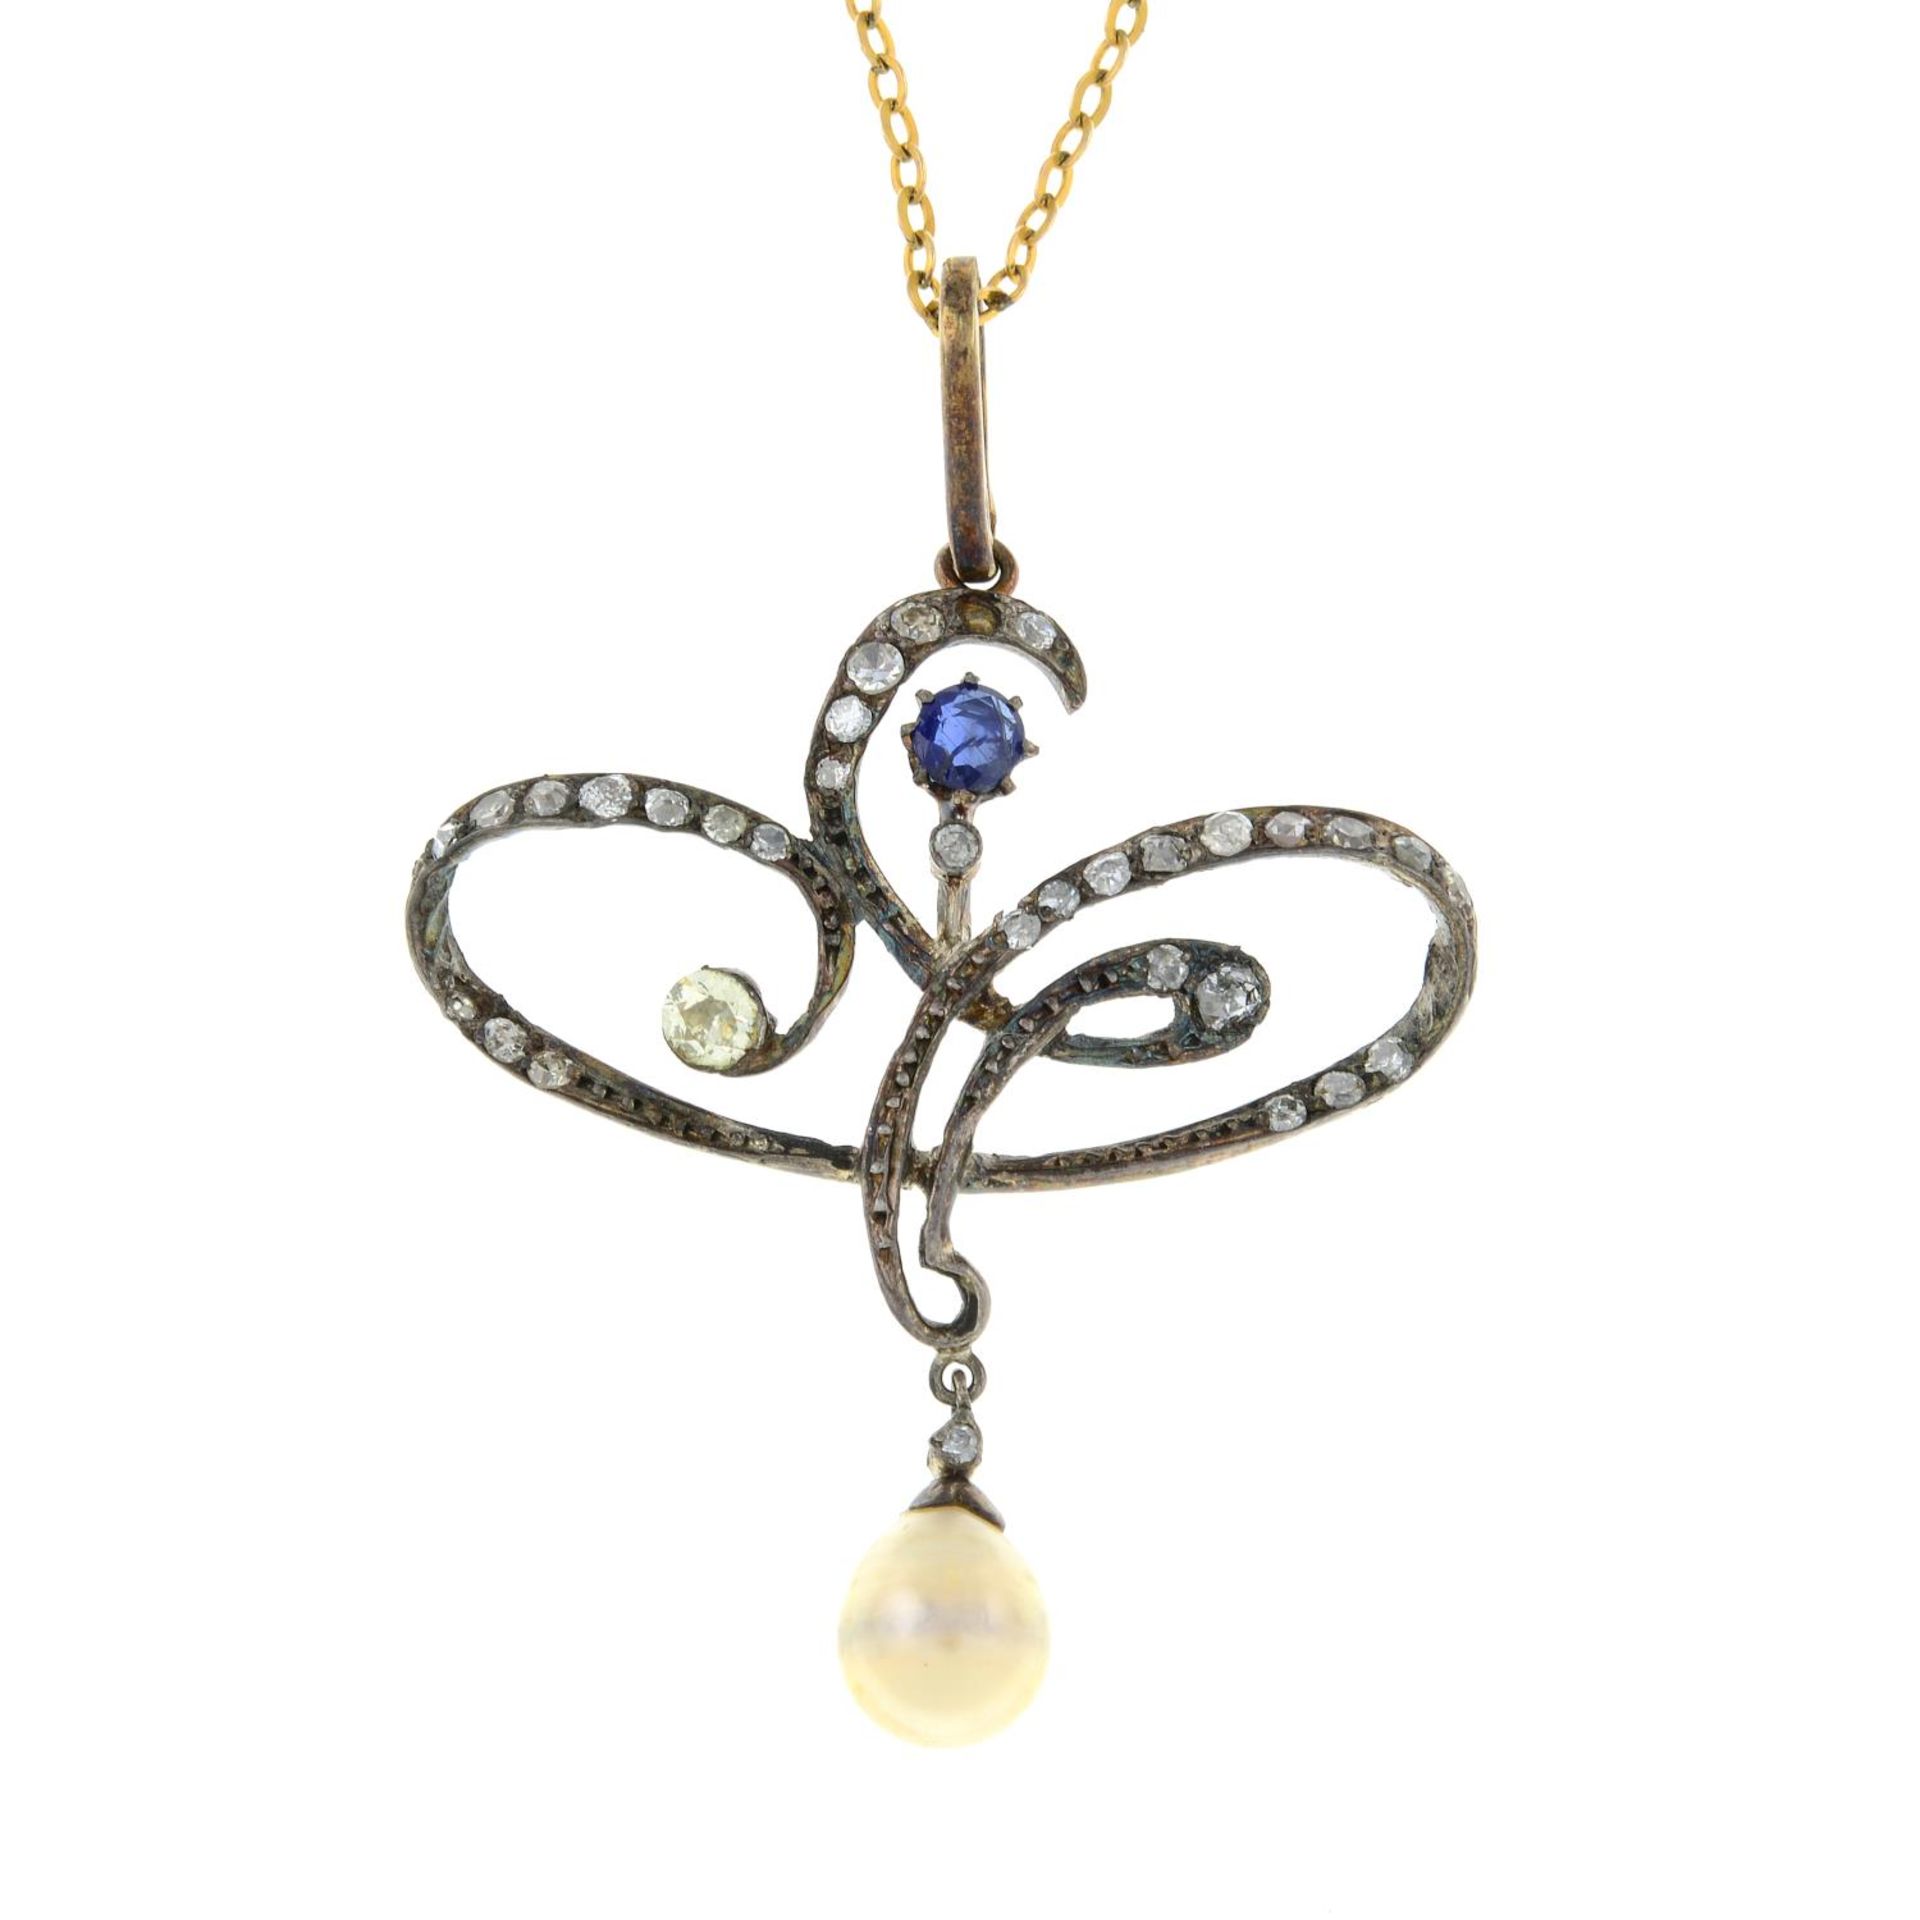 A cultured pearl, sapphire and old-cut diamond pendant, suspended from a chain.